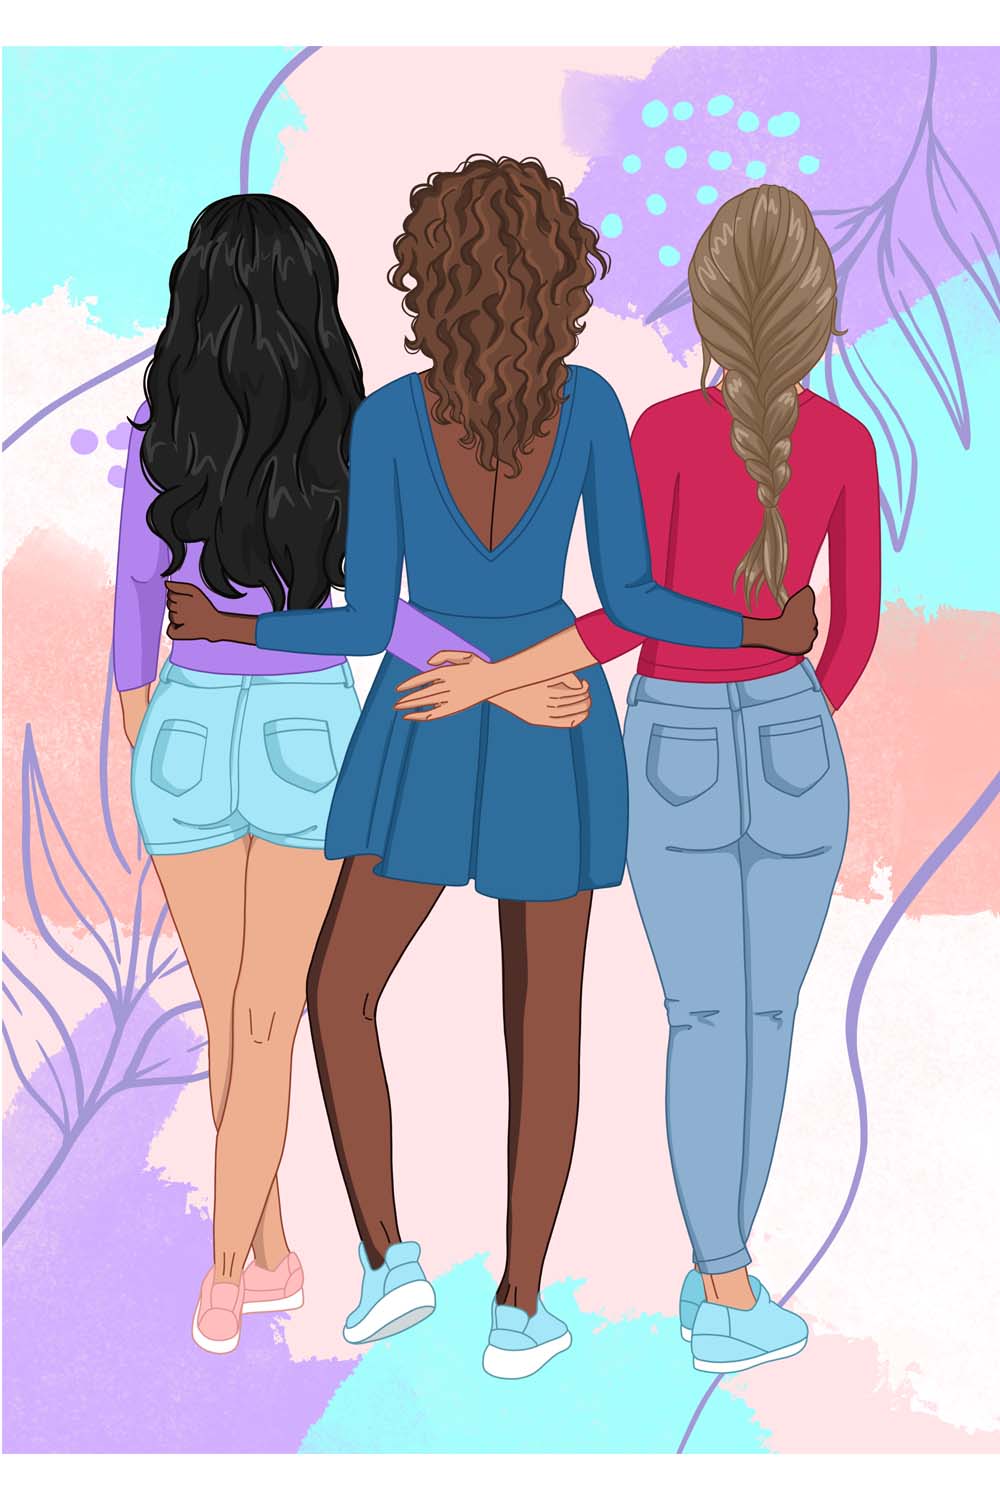 Drawn three girls in shorts, dress and jeans from the back.